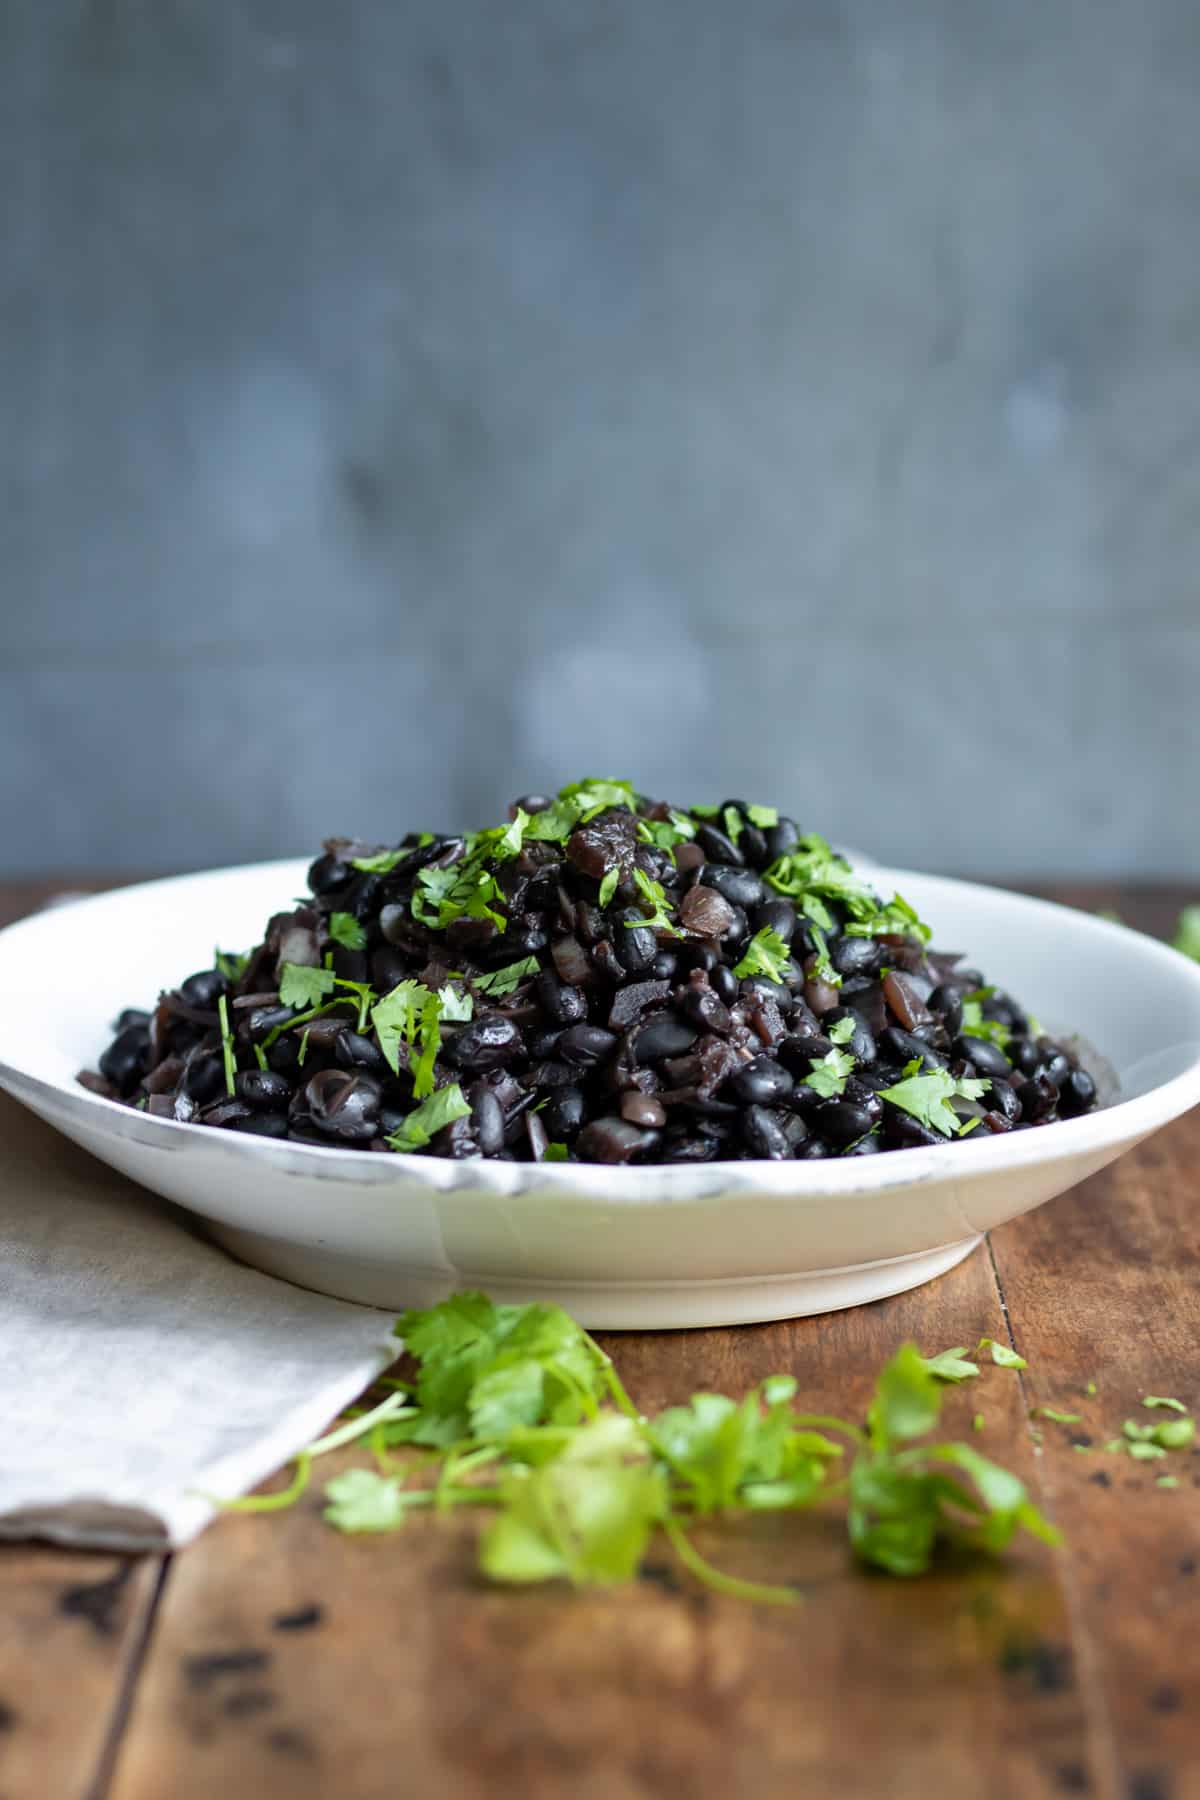 Serving dish of black beans cooked in a crock pot.